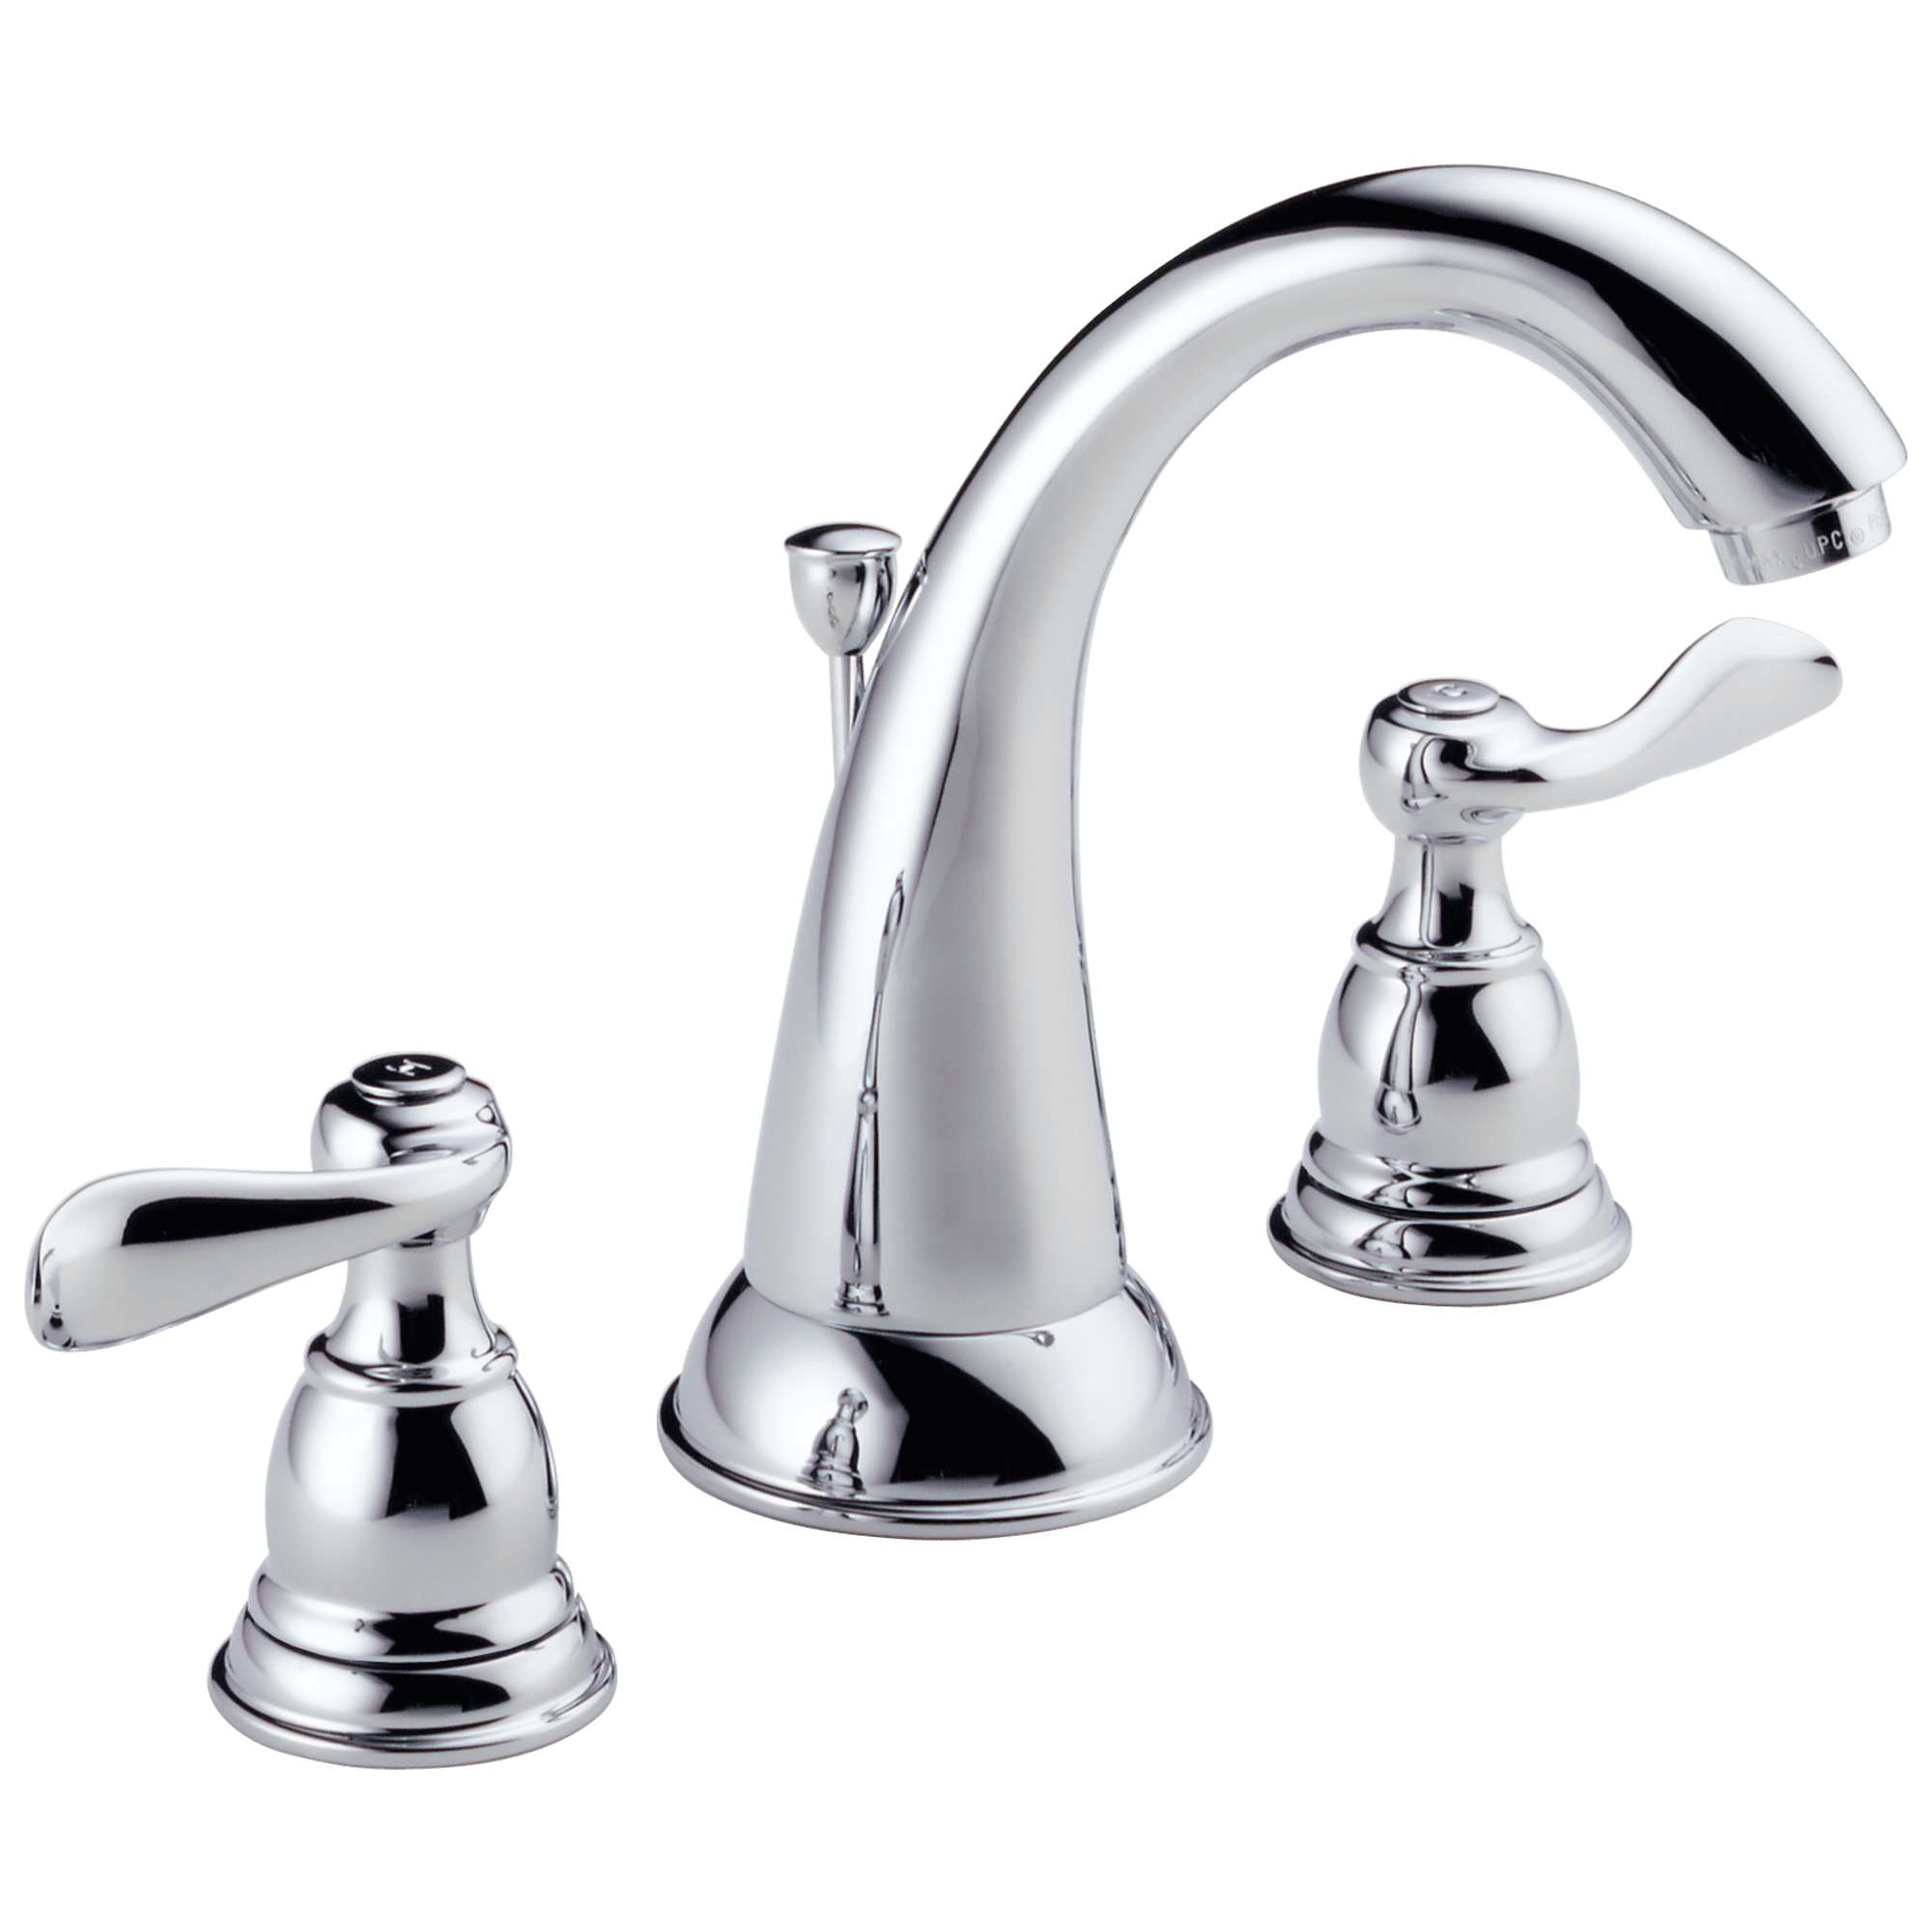 Windemere Polished Chrome 2-Handle Widespread Bathroom Faucet